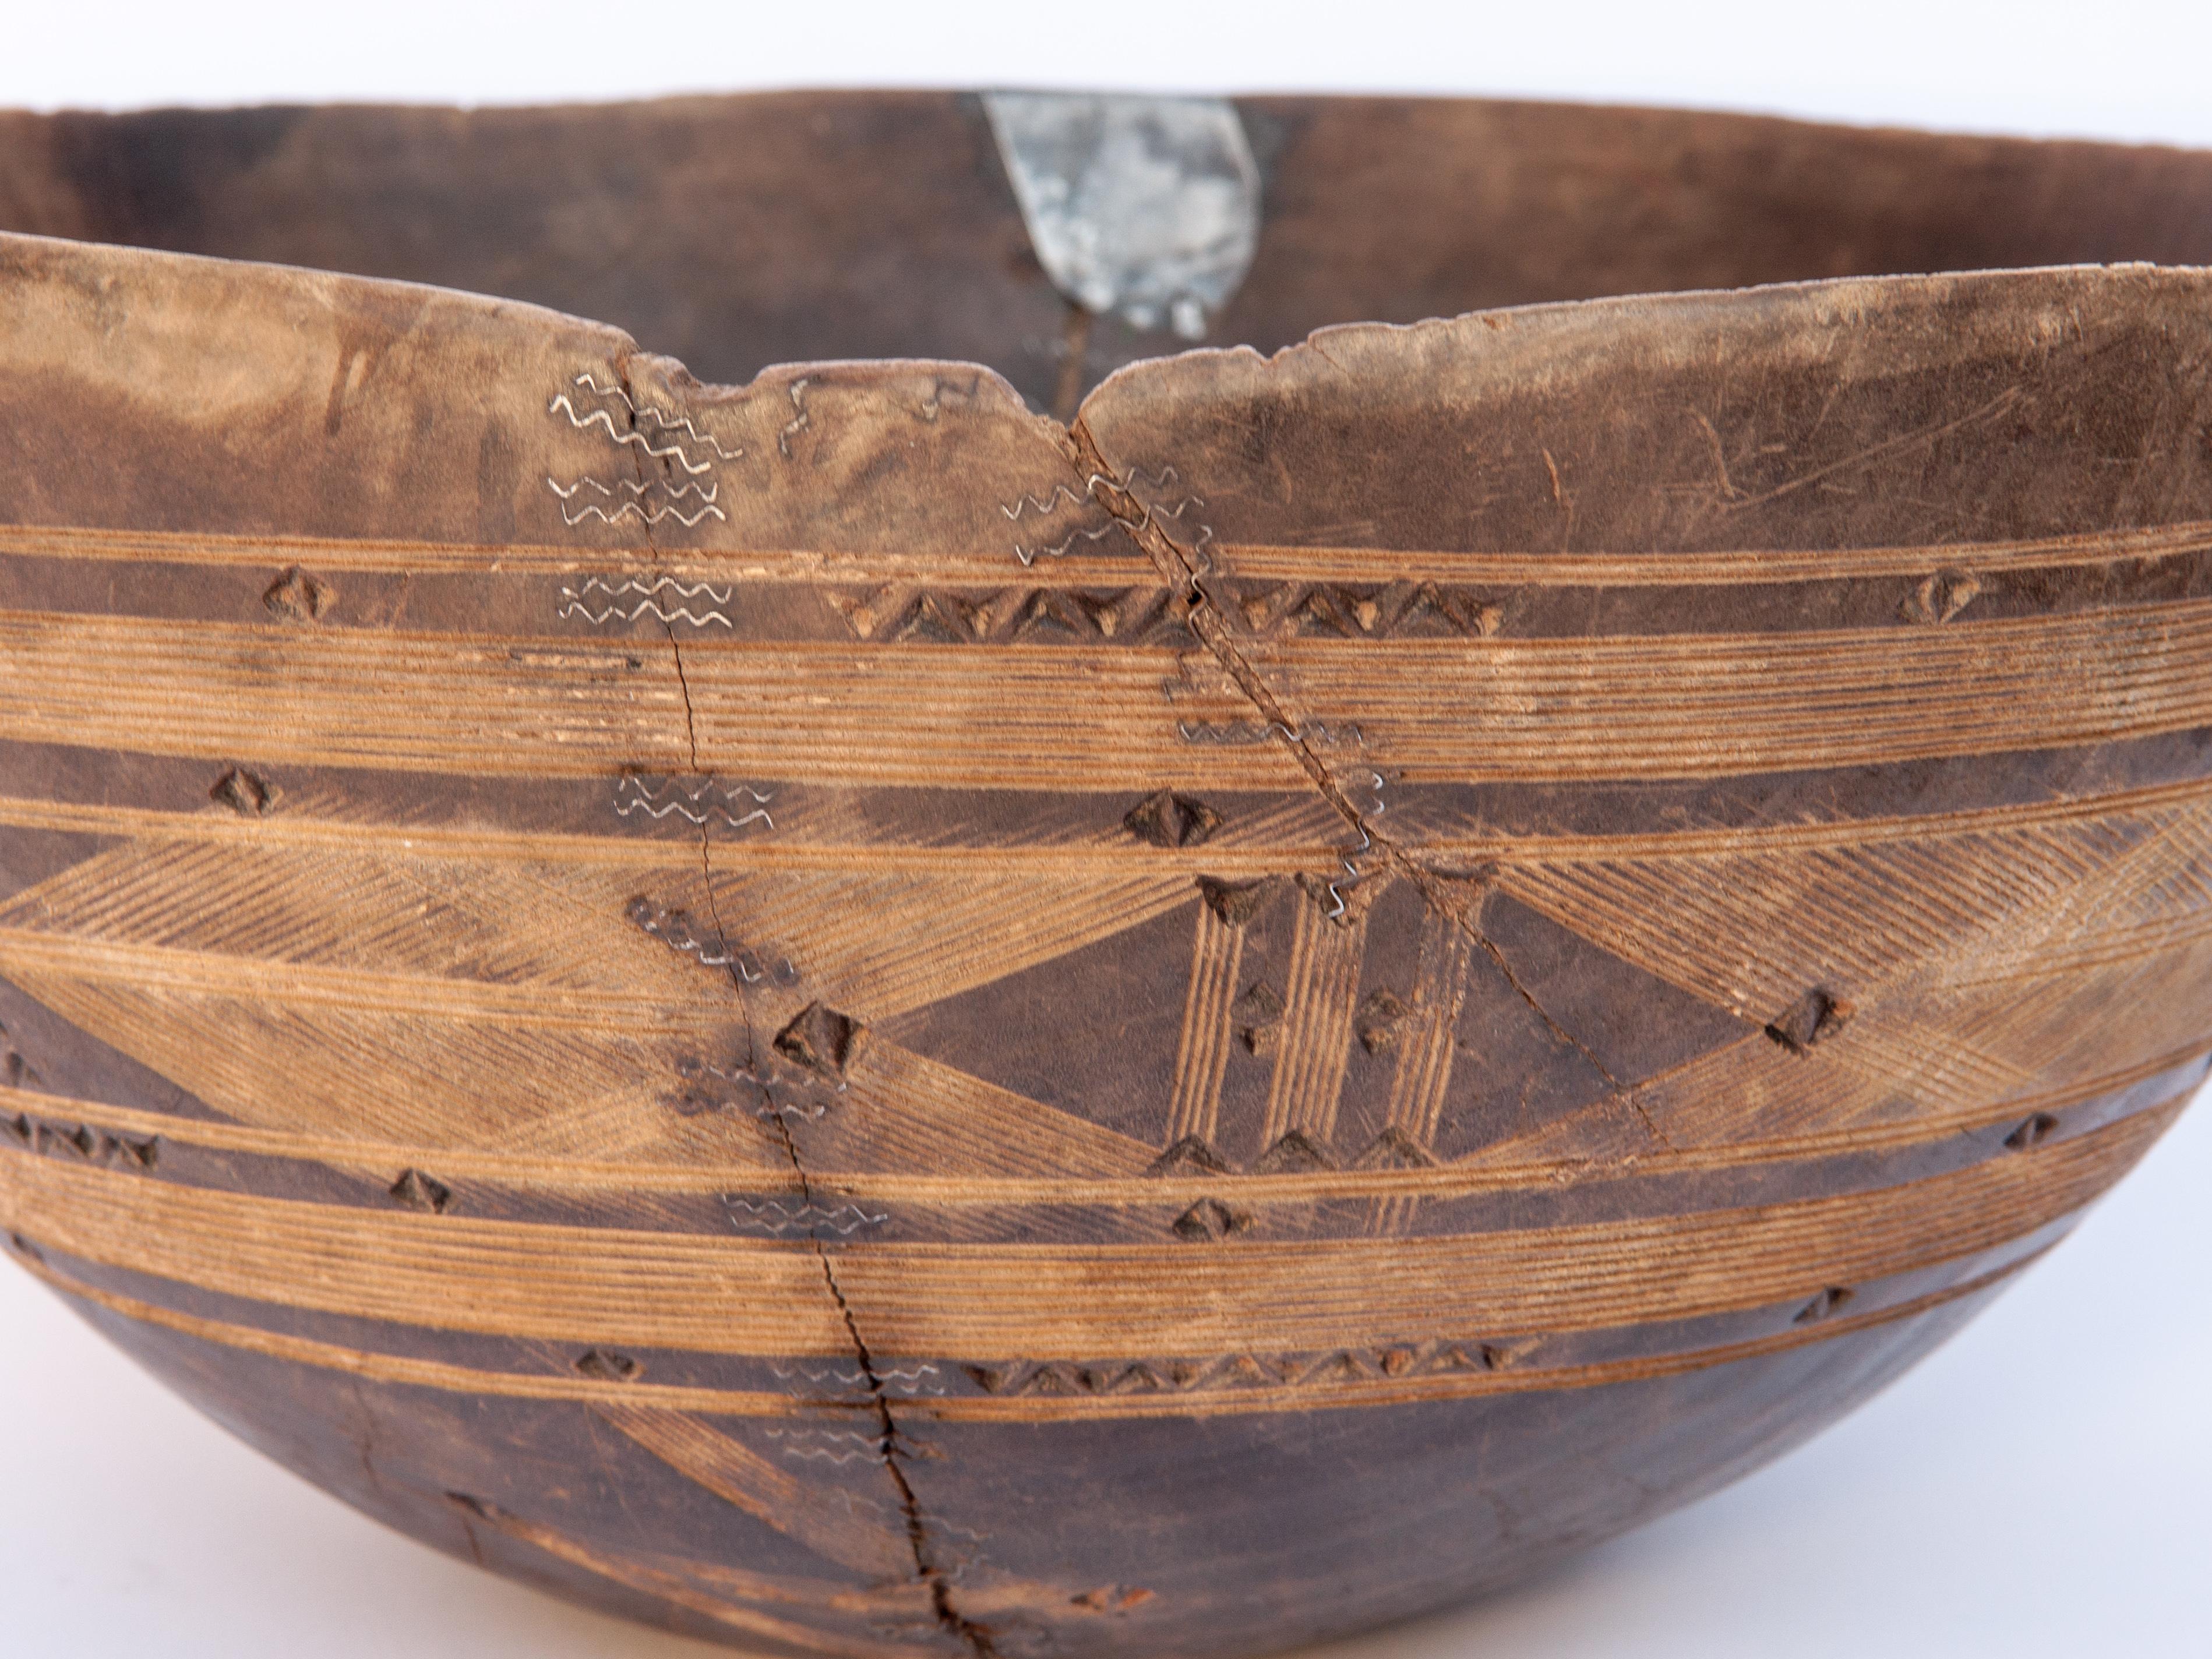 Tribal wooden bowl with carved design, 14